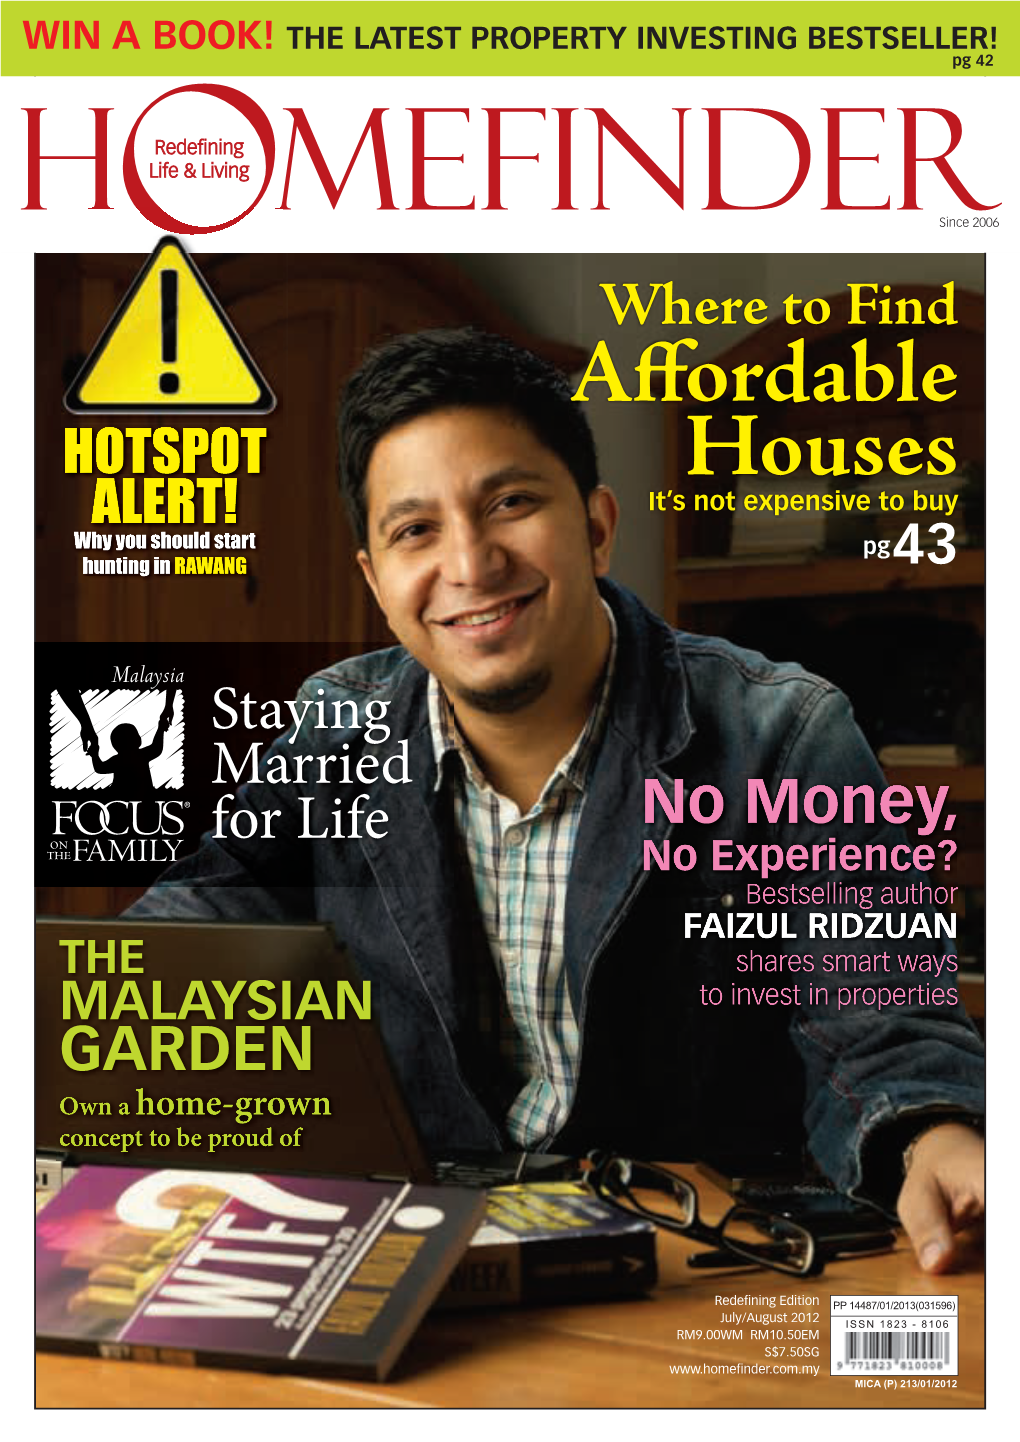 FAIZUL RIDZUAN the Shares Smart Ways MALAYSIAN to Invest in Properties GARDEN Own a Home-Grown Concept to Be Proud Of